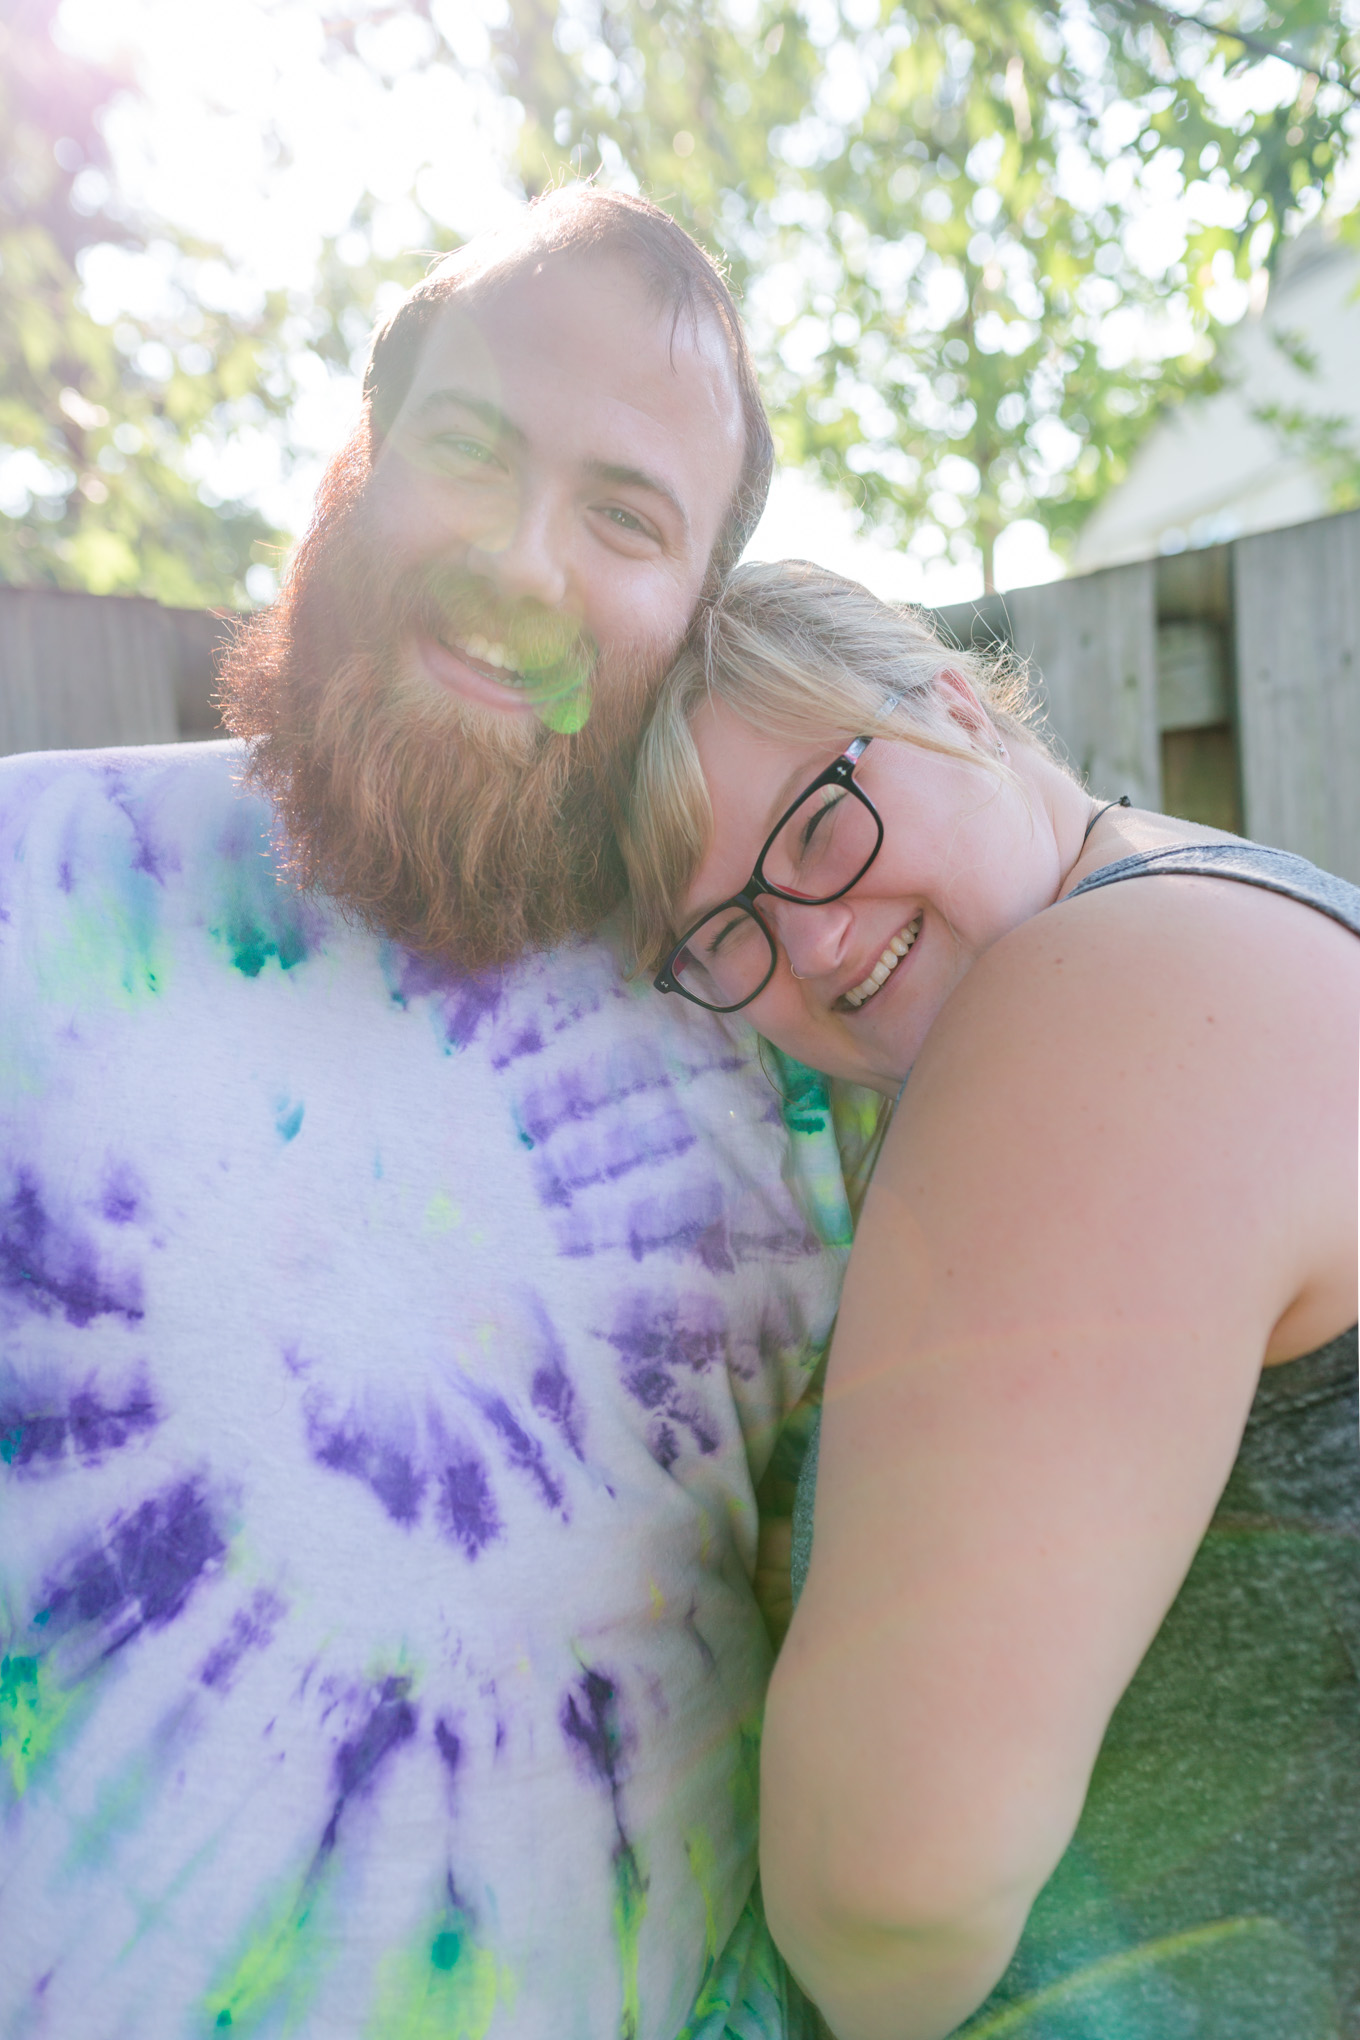 your own risk, married couple, mom and dad, tie died shirt, tie dye, glasses, bearded man, magic hour, summertime, birthday party